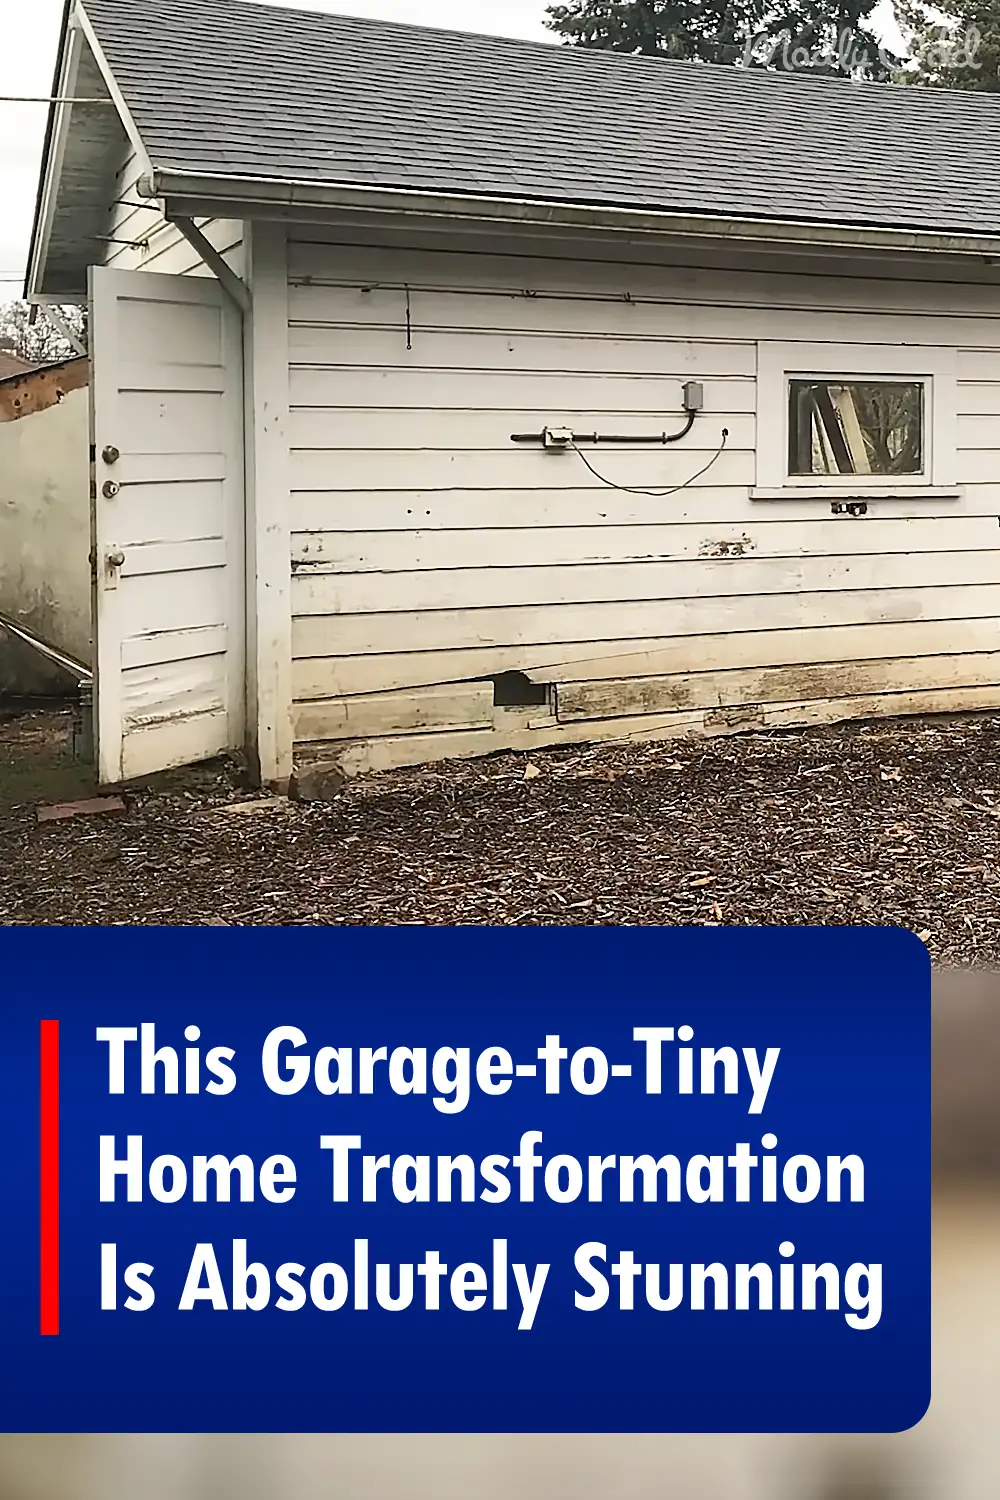 This Garage-to-Tiny Home Transformation Is Absolutely Stunning